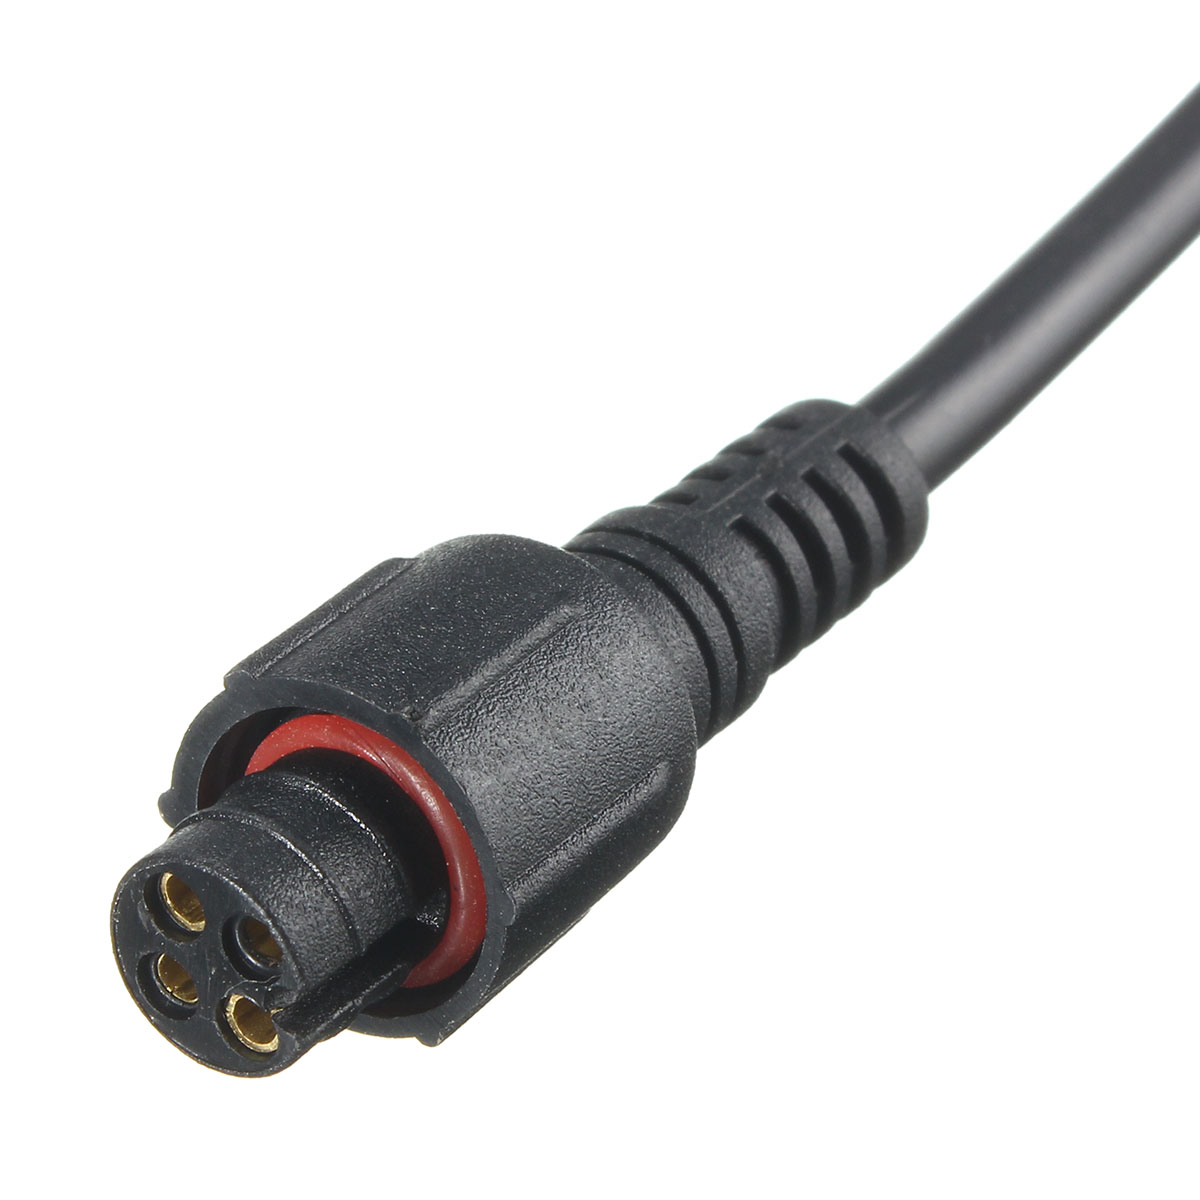 4-Pin-2A-Waterproof-Male-Female-Extension-Cable-Wire-Connector-for-RGB-LED-Strip-Light-1456460